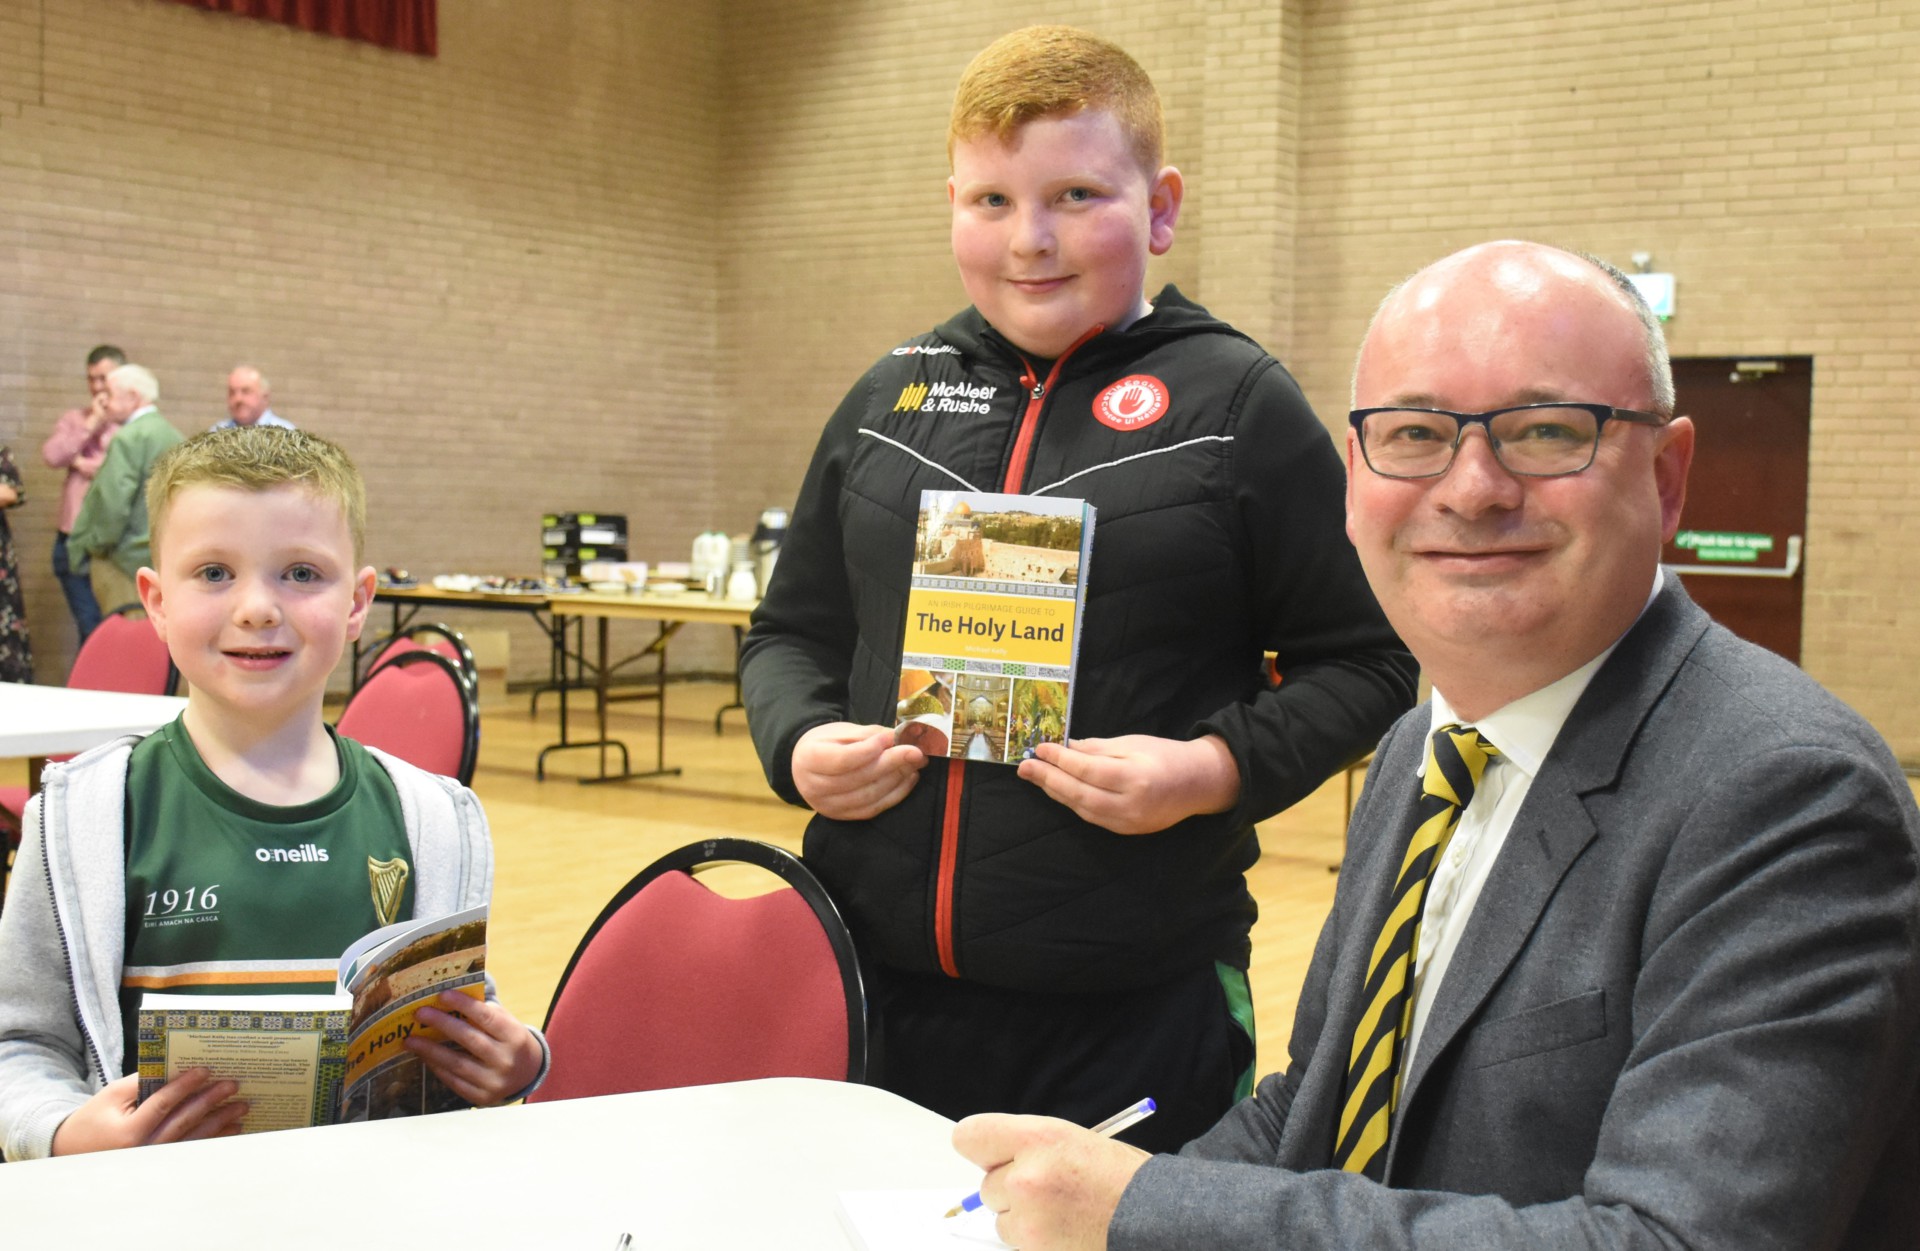 ‘One of their own’ celebrated by local parish at book launch